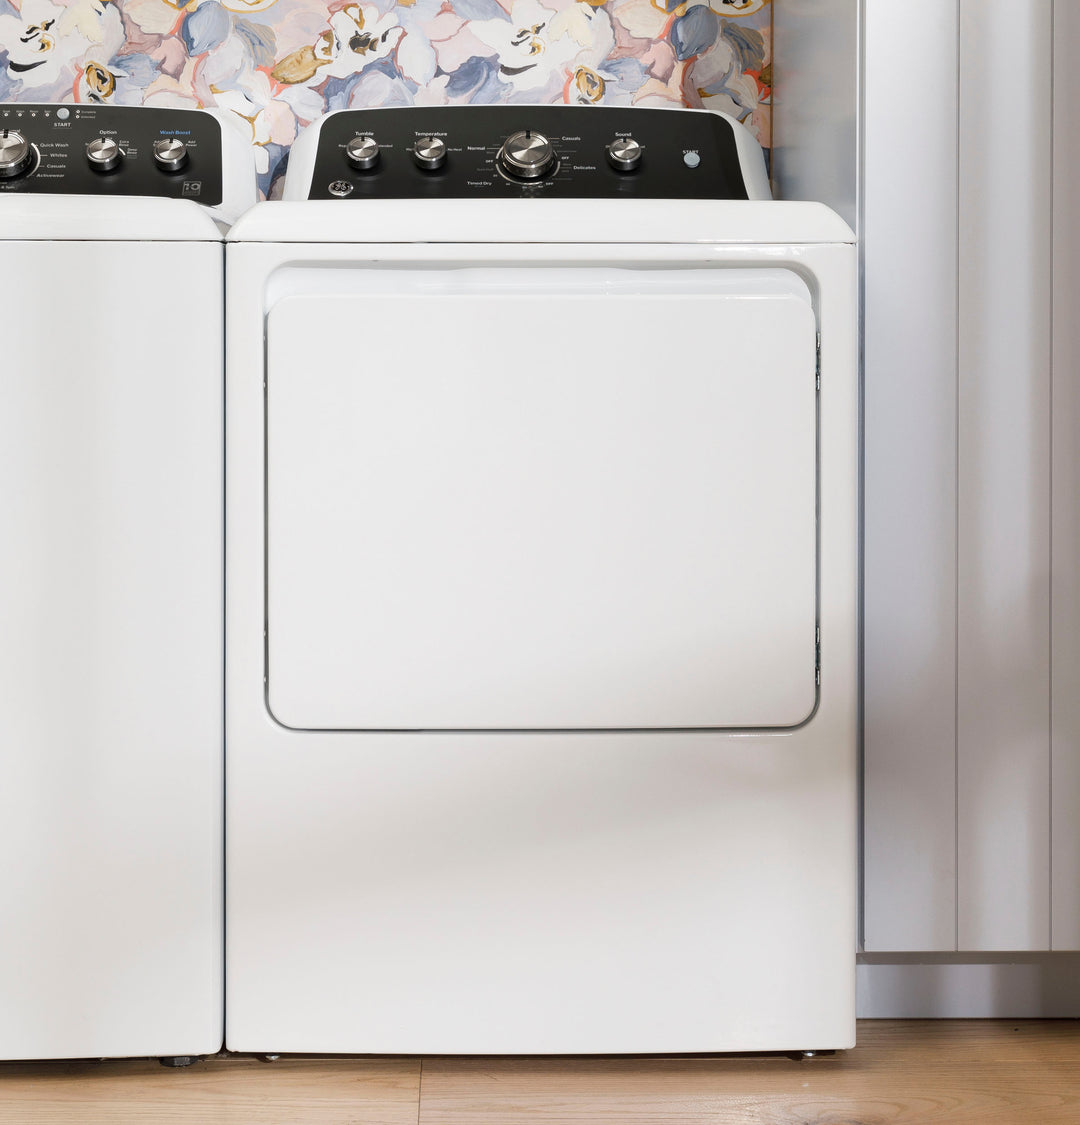 GE - 7.2 Cu. Ft. Electric Dryer with Long Venting up to 120 Ft. - White with Silver Matte_6